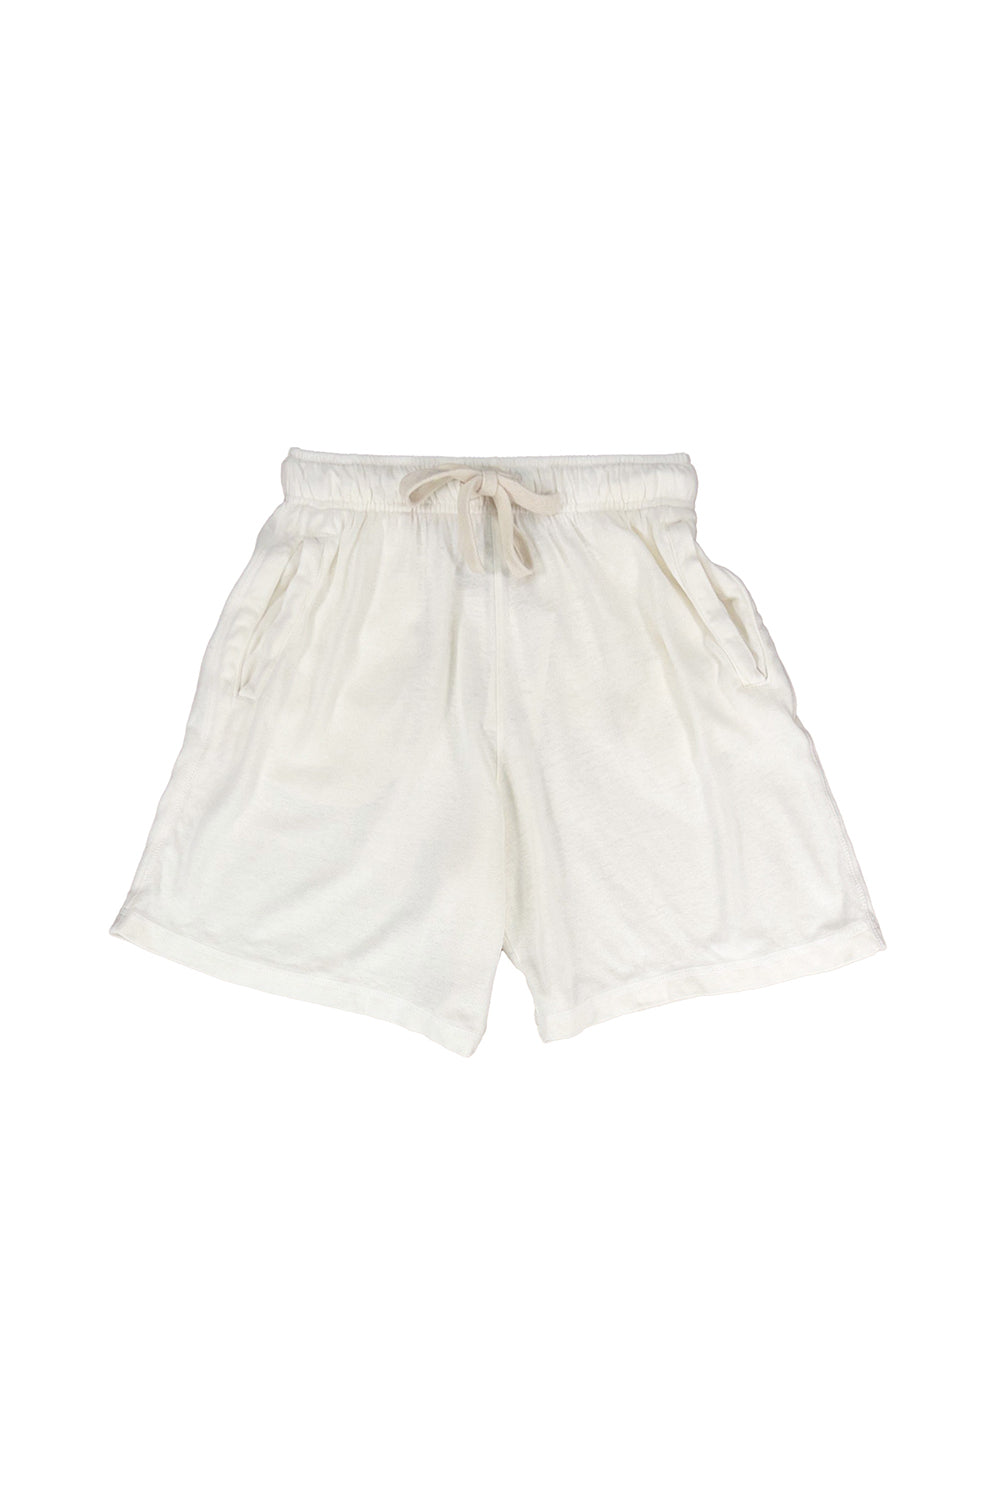 Lounge Short | Jungmaven Hemp Clothing & Accessories / Color: Washed White